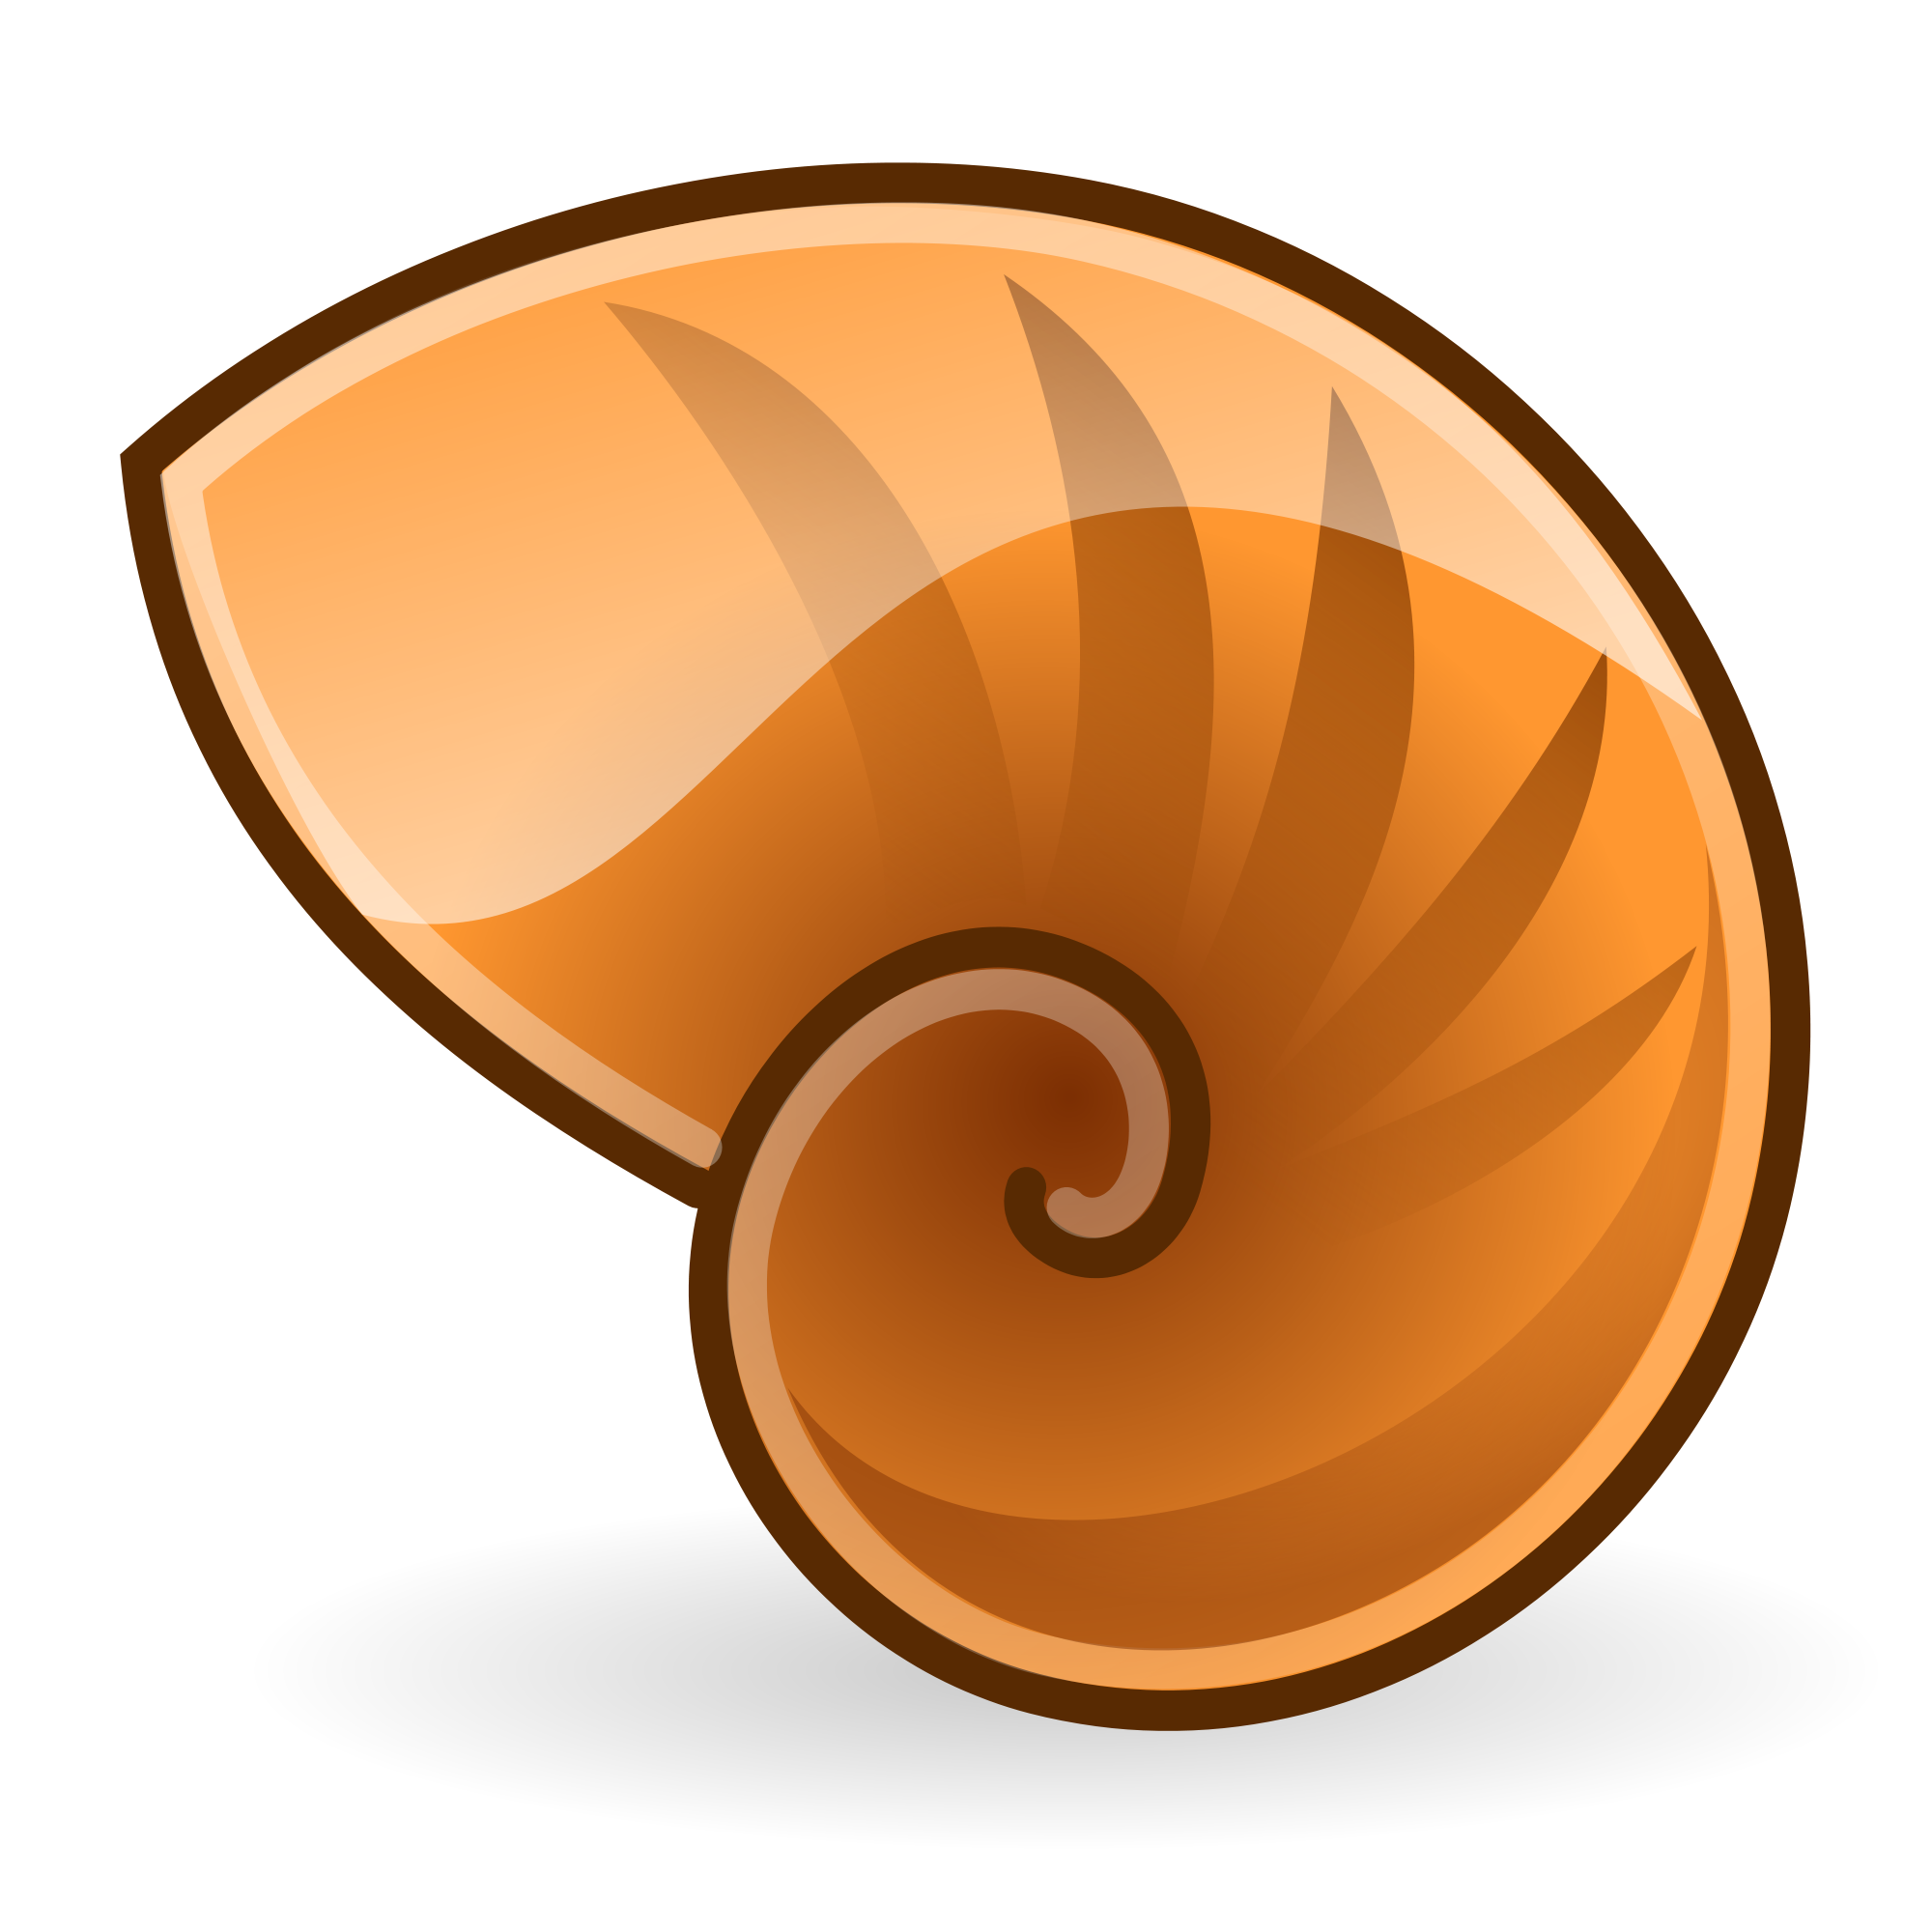 Files Shell Gnome Icons Manager Computer File PNG Image